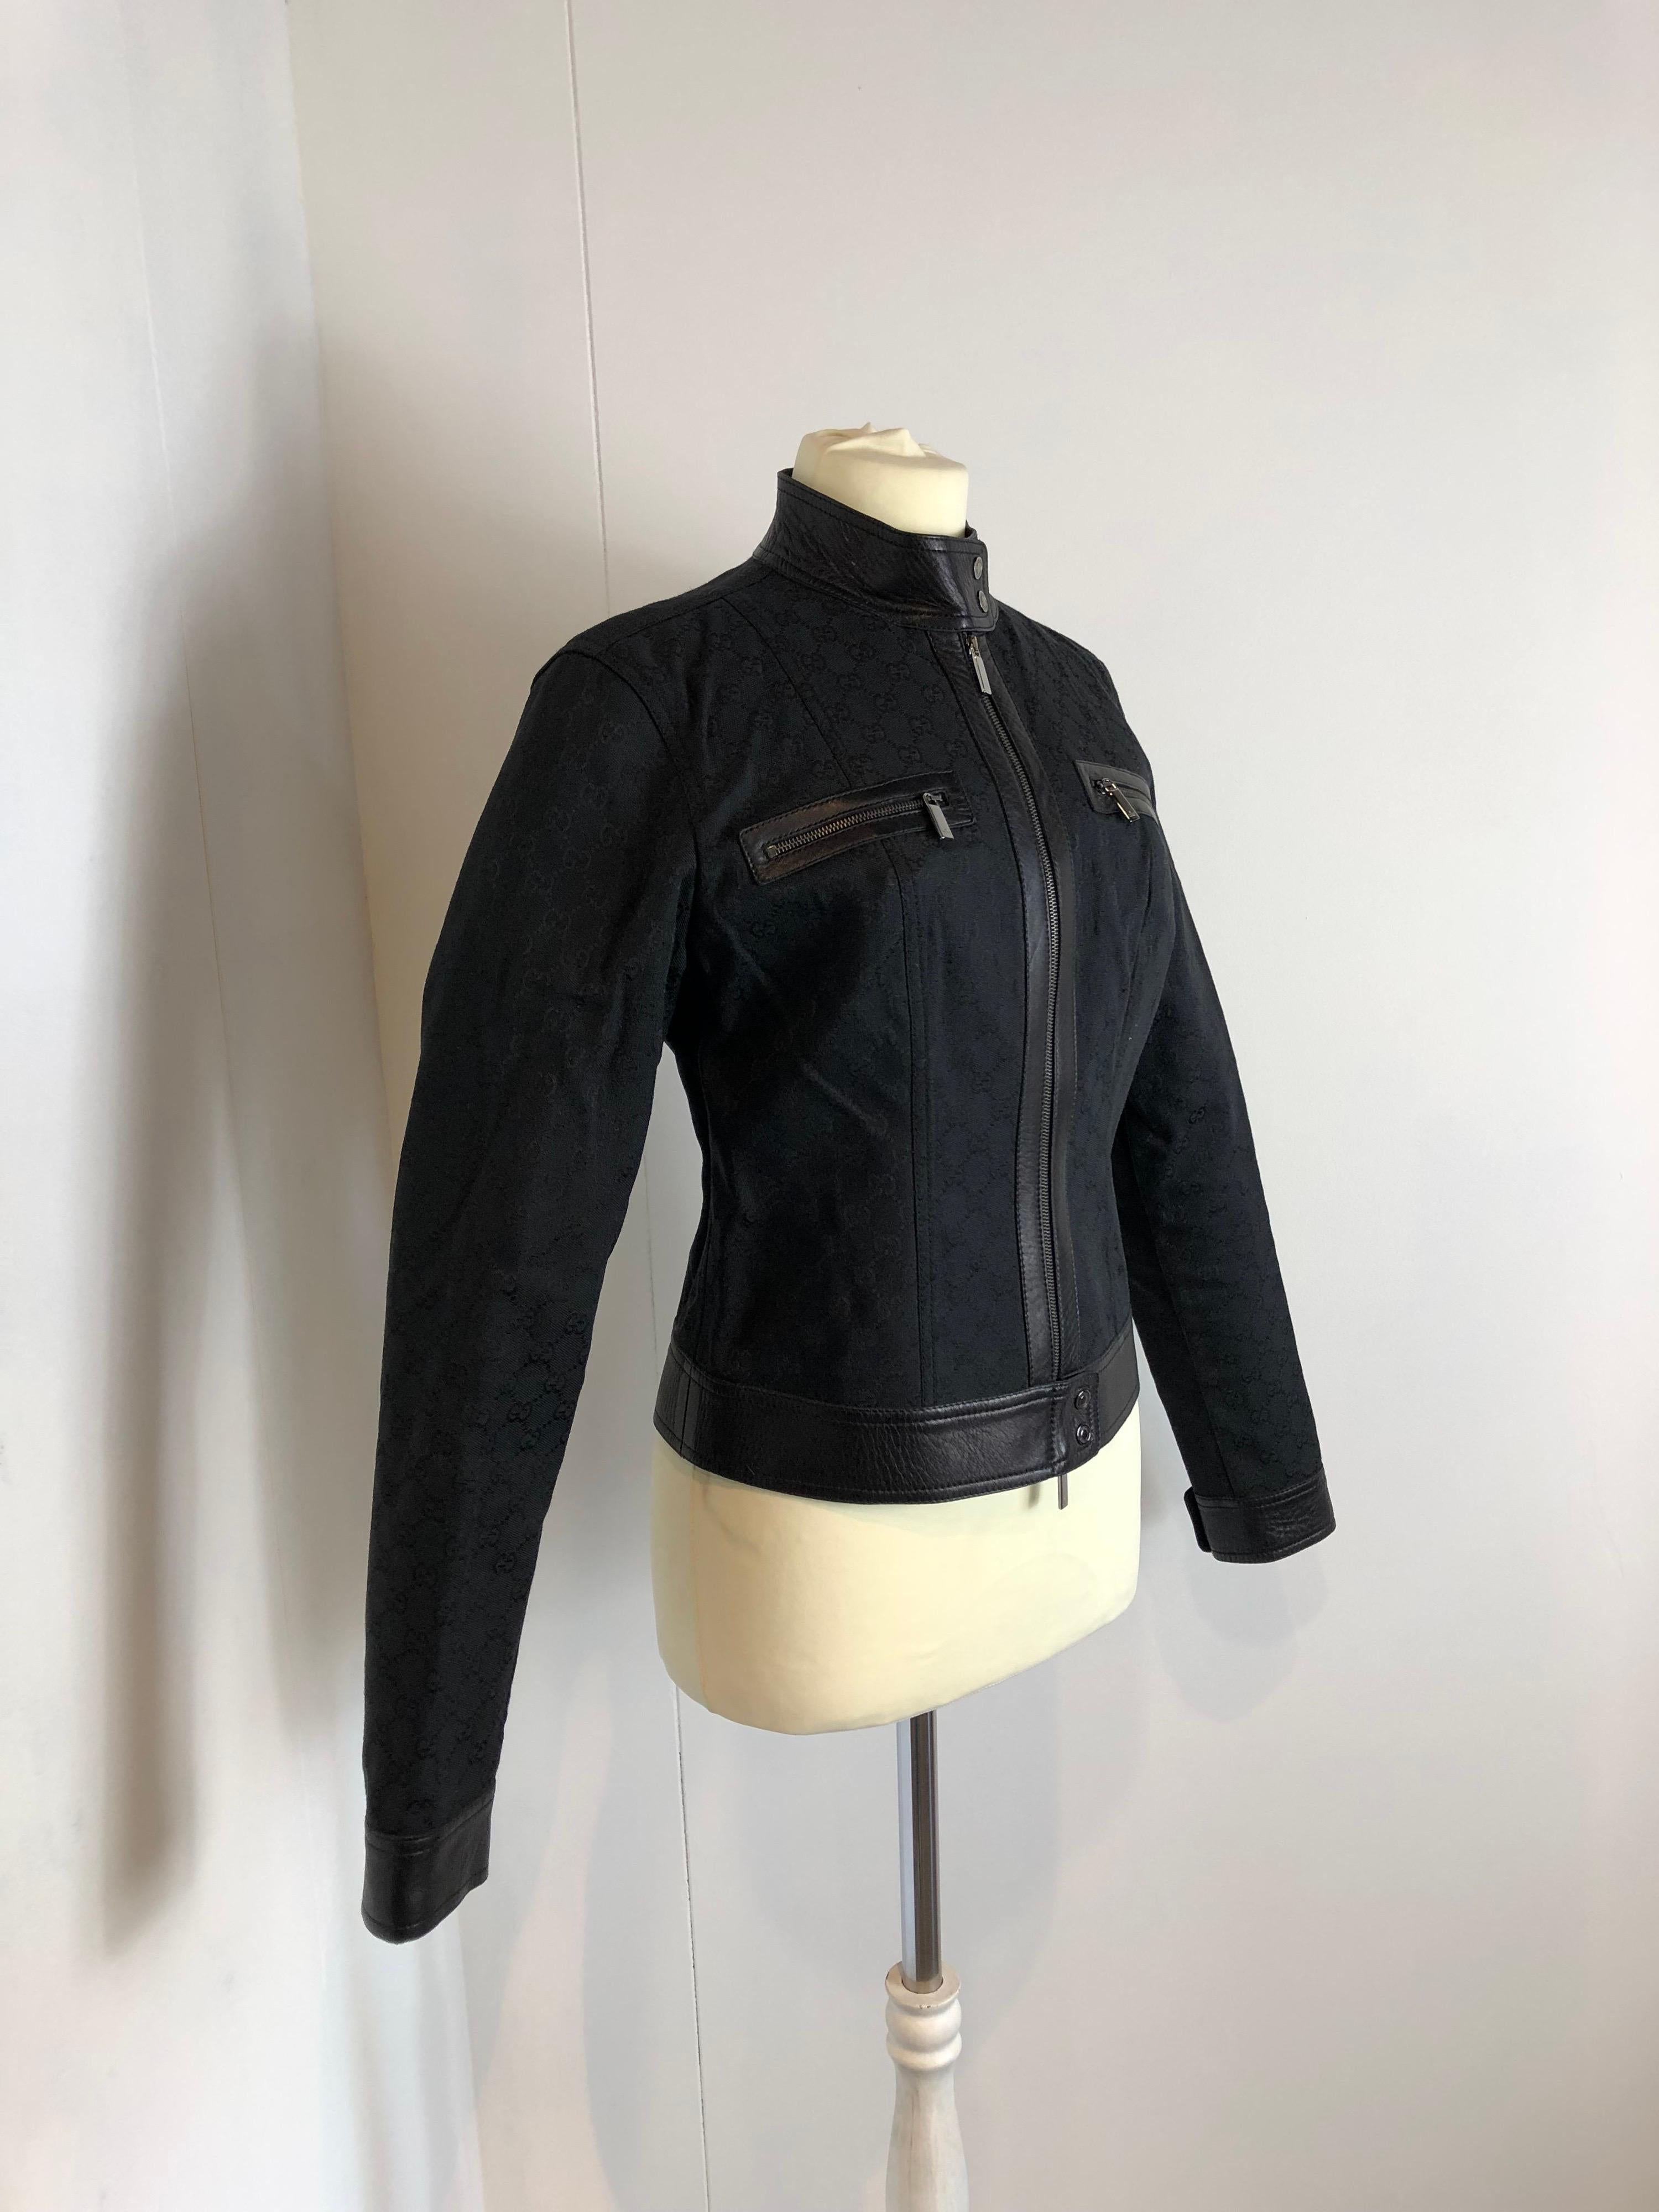 Gucci monogram vintage black jacket.
Coming from 2000 collection by Tom Ford.
Now re proposed by Alessandro Michele during the last fashion show. Iconic piece. 
Fabric is a mix between polyester and cotton. Details in leather. Lining in cupro.